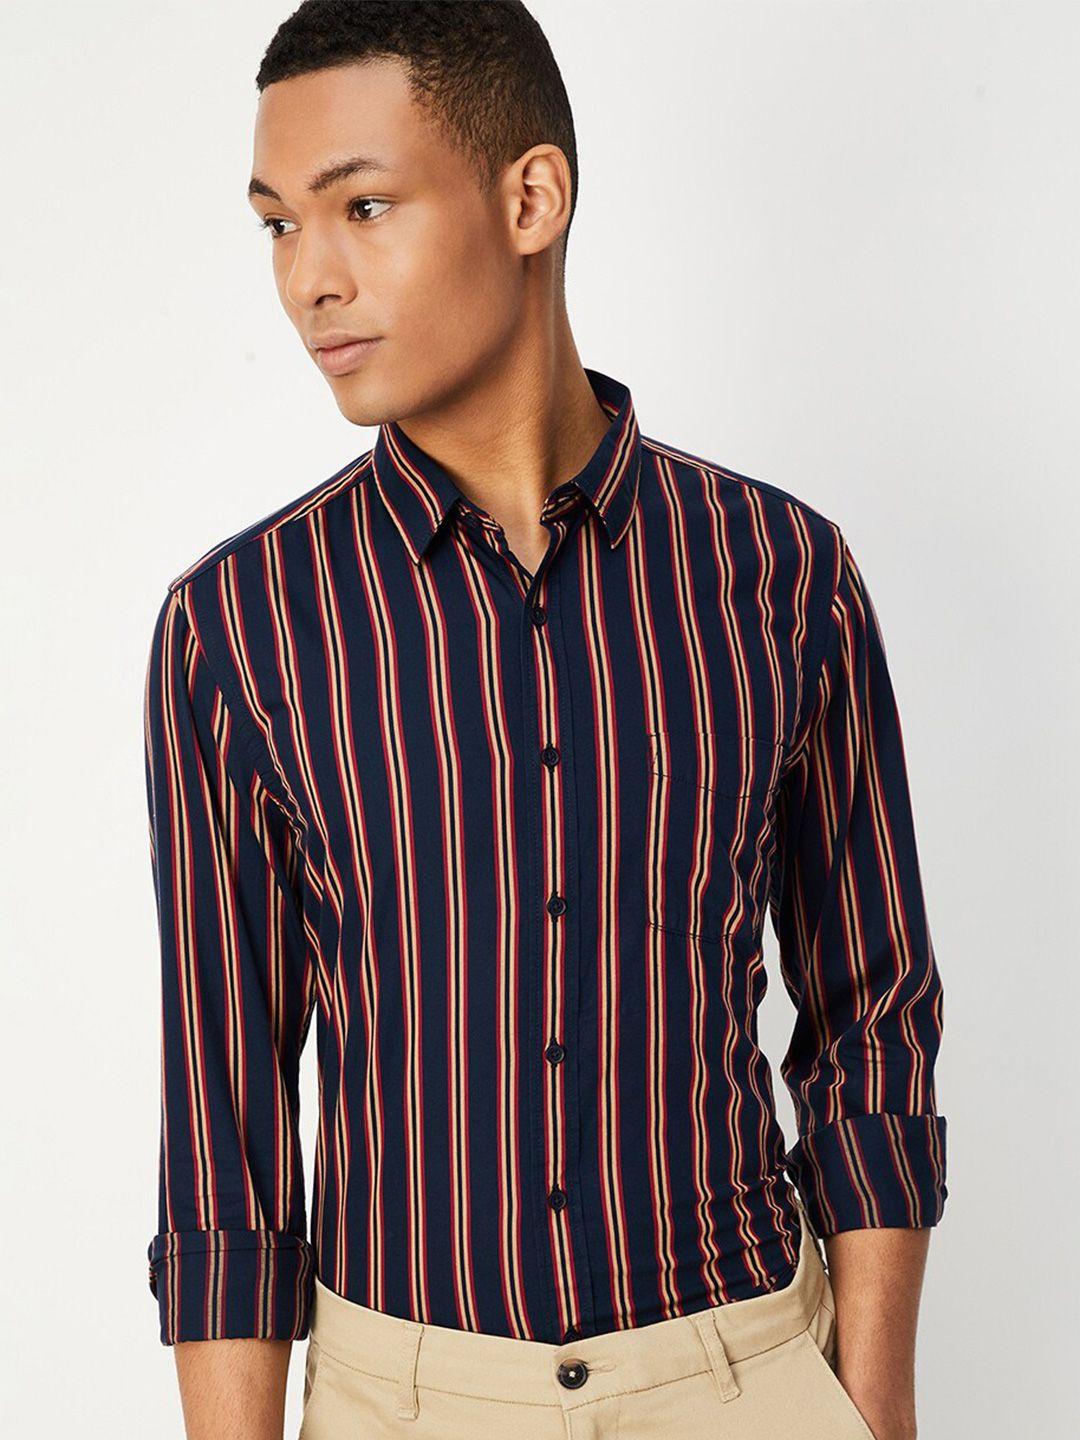 max vertical striped pure cotton casual shirt